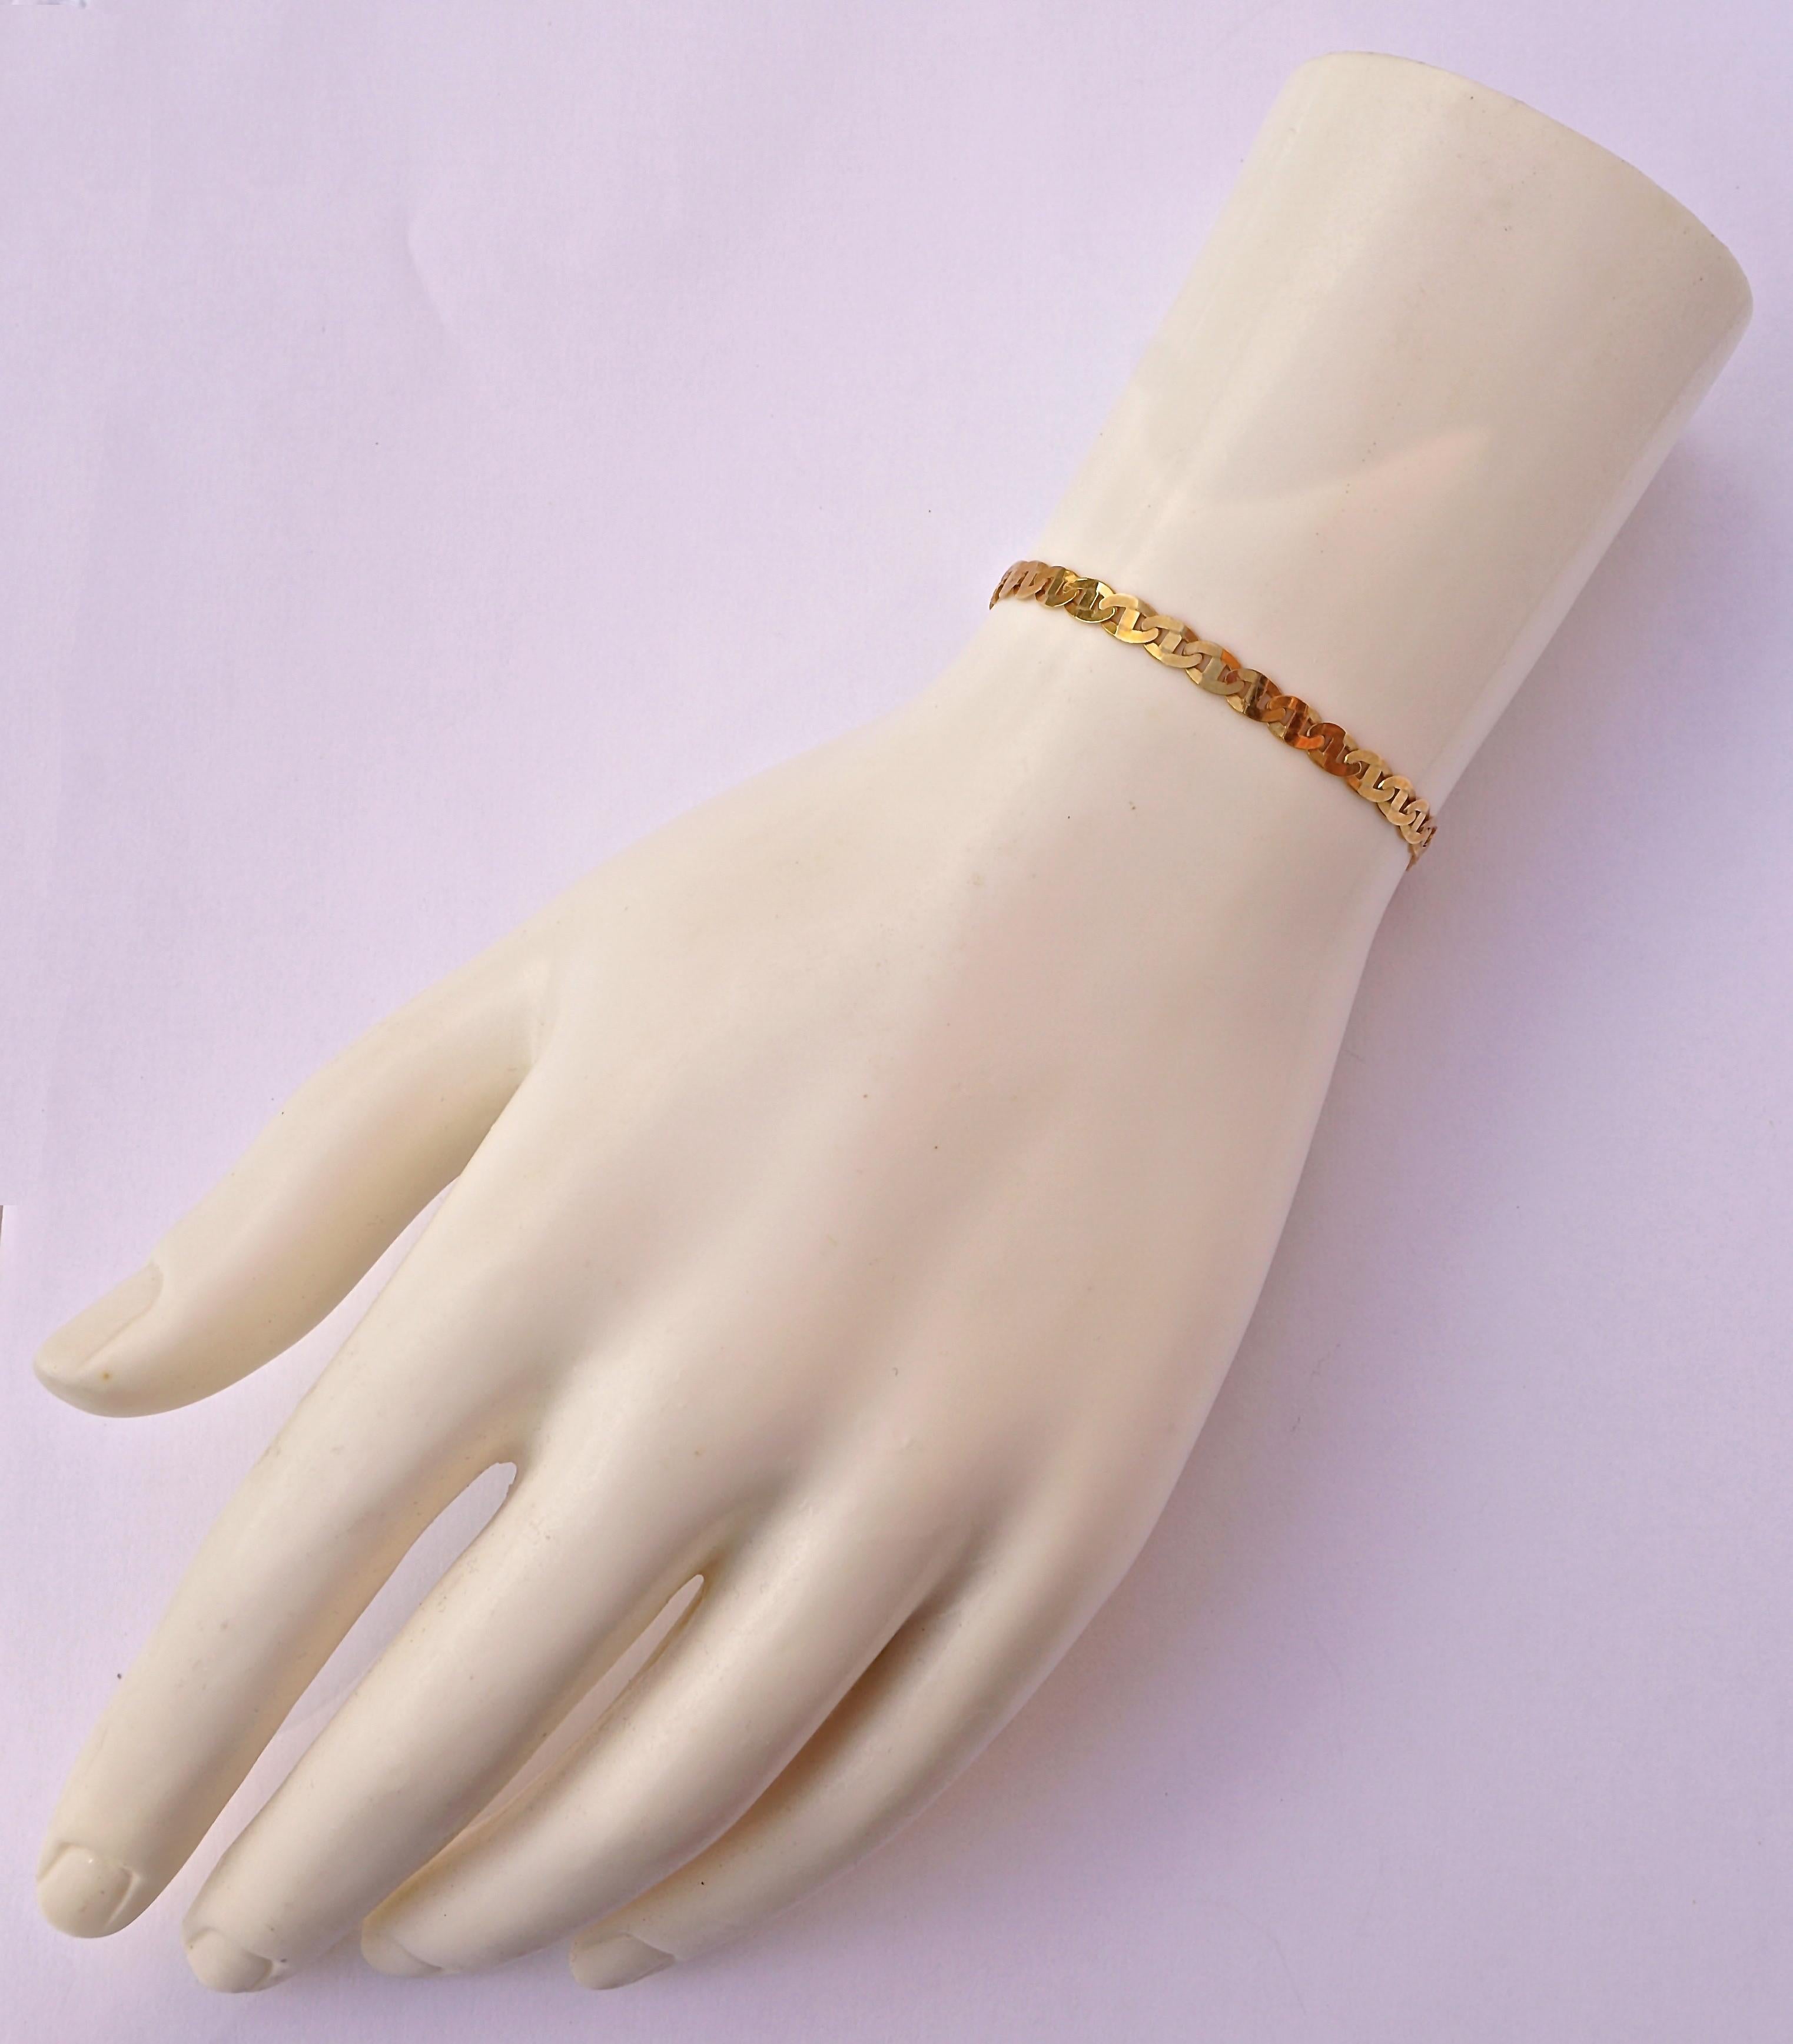 IW 14K gold anchor chain link bracelet, with a lobster clasp. Measuring length 20.3cm / 7.99 inches, by width 4mm / 0.16 inches.

This is a beautiful vintage yellow gold bracelet of fine quality.